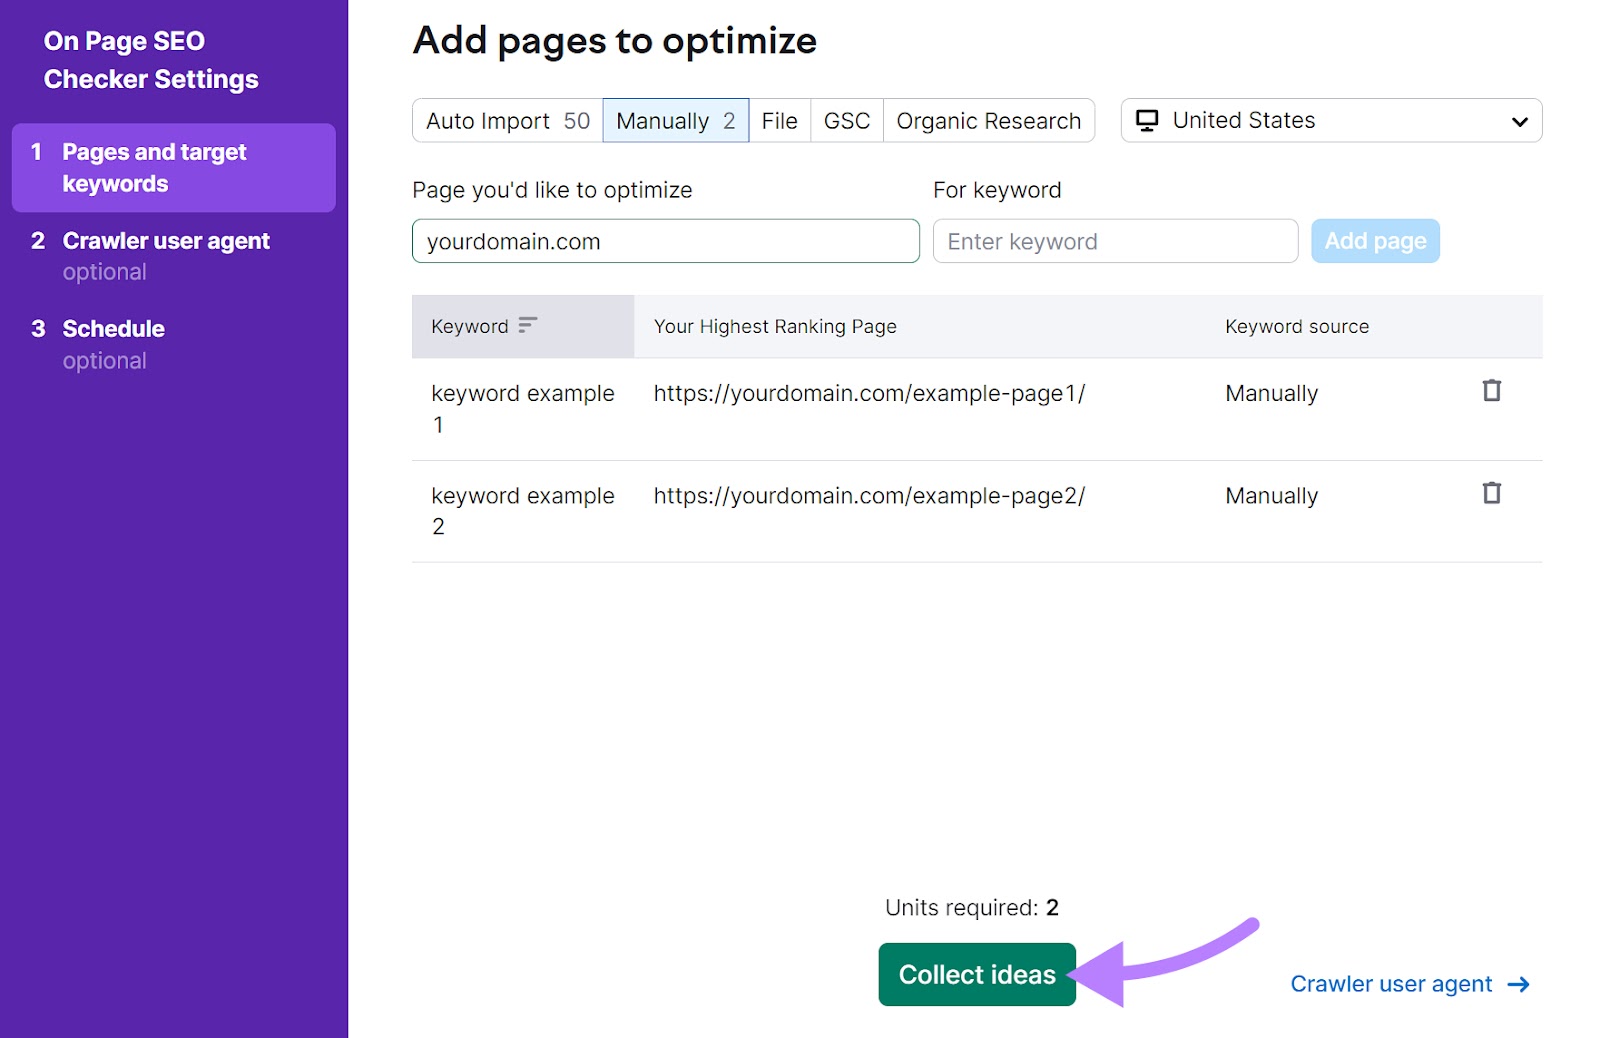 "Add pages to optimize" window in On Page SEO Checker